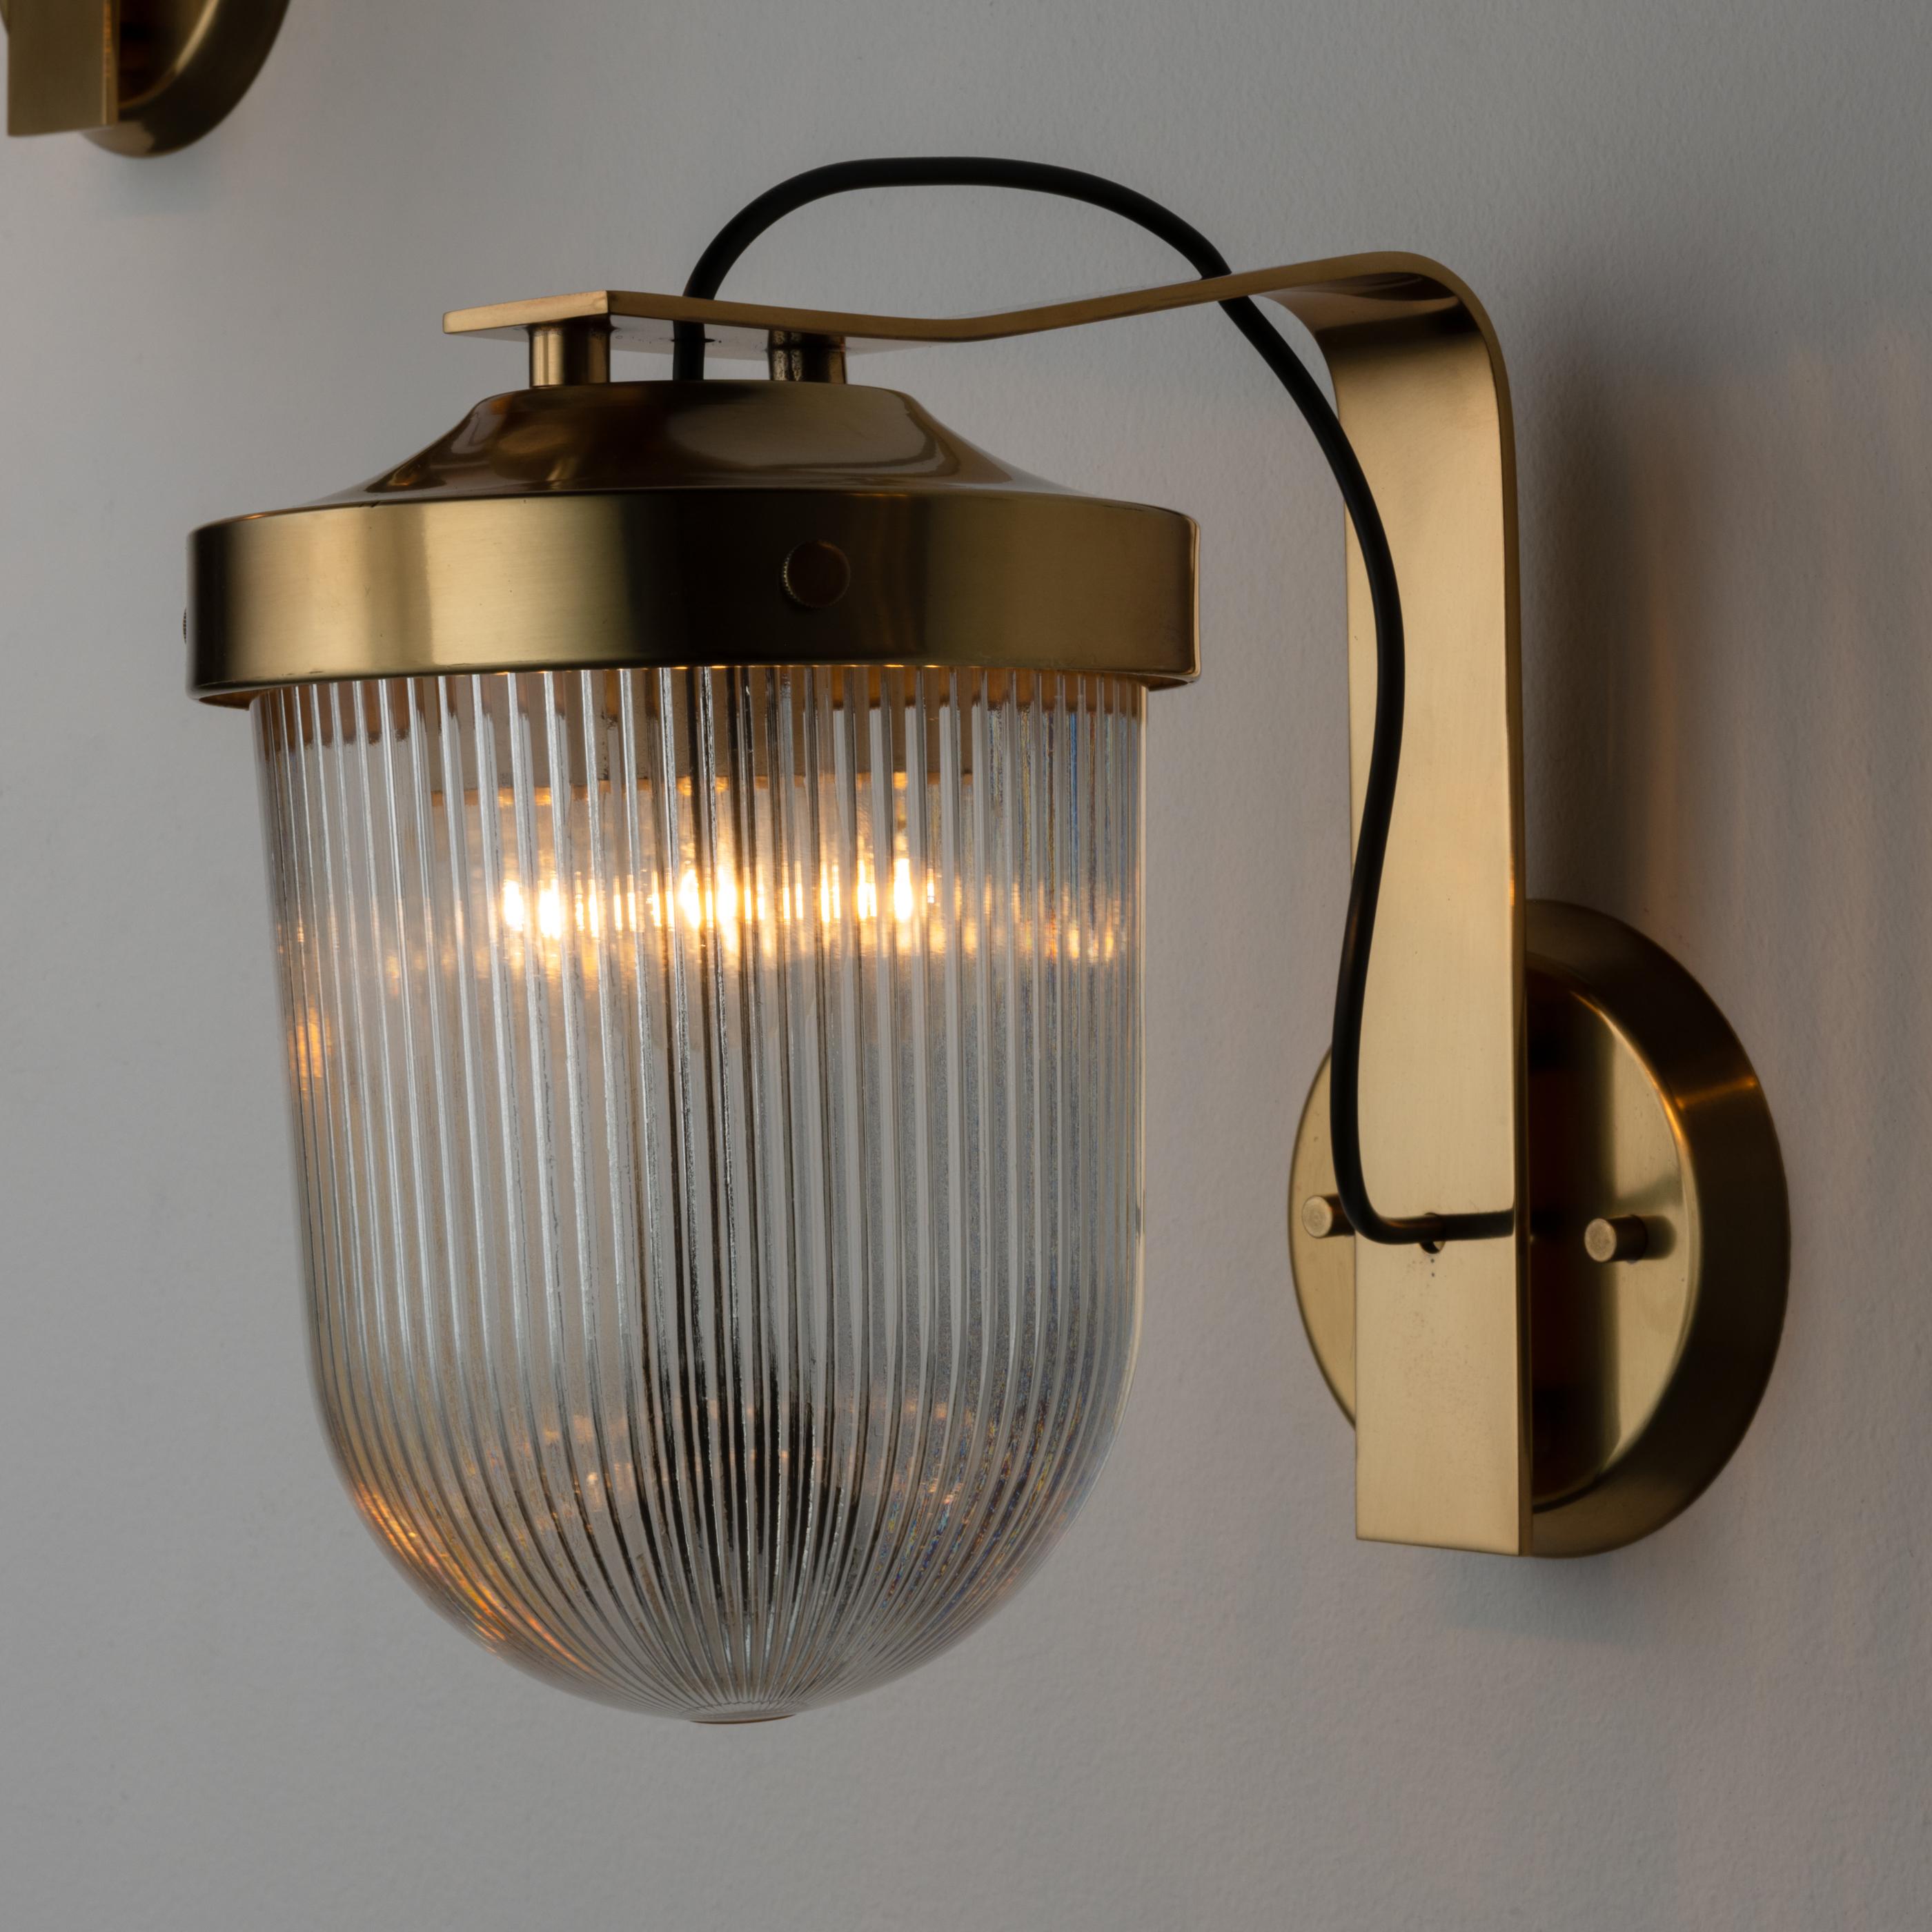 Rare Model G.A. sconce by Fulvio Raboni for Delitala. Designed and Manufactured in Italy, 1959. Curved brass armatures, paired with clear printed glass diffuser. We recommend one E27 40w maximum bulb. Wired for US. Bulb included as a one time